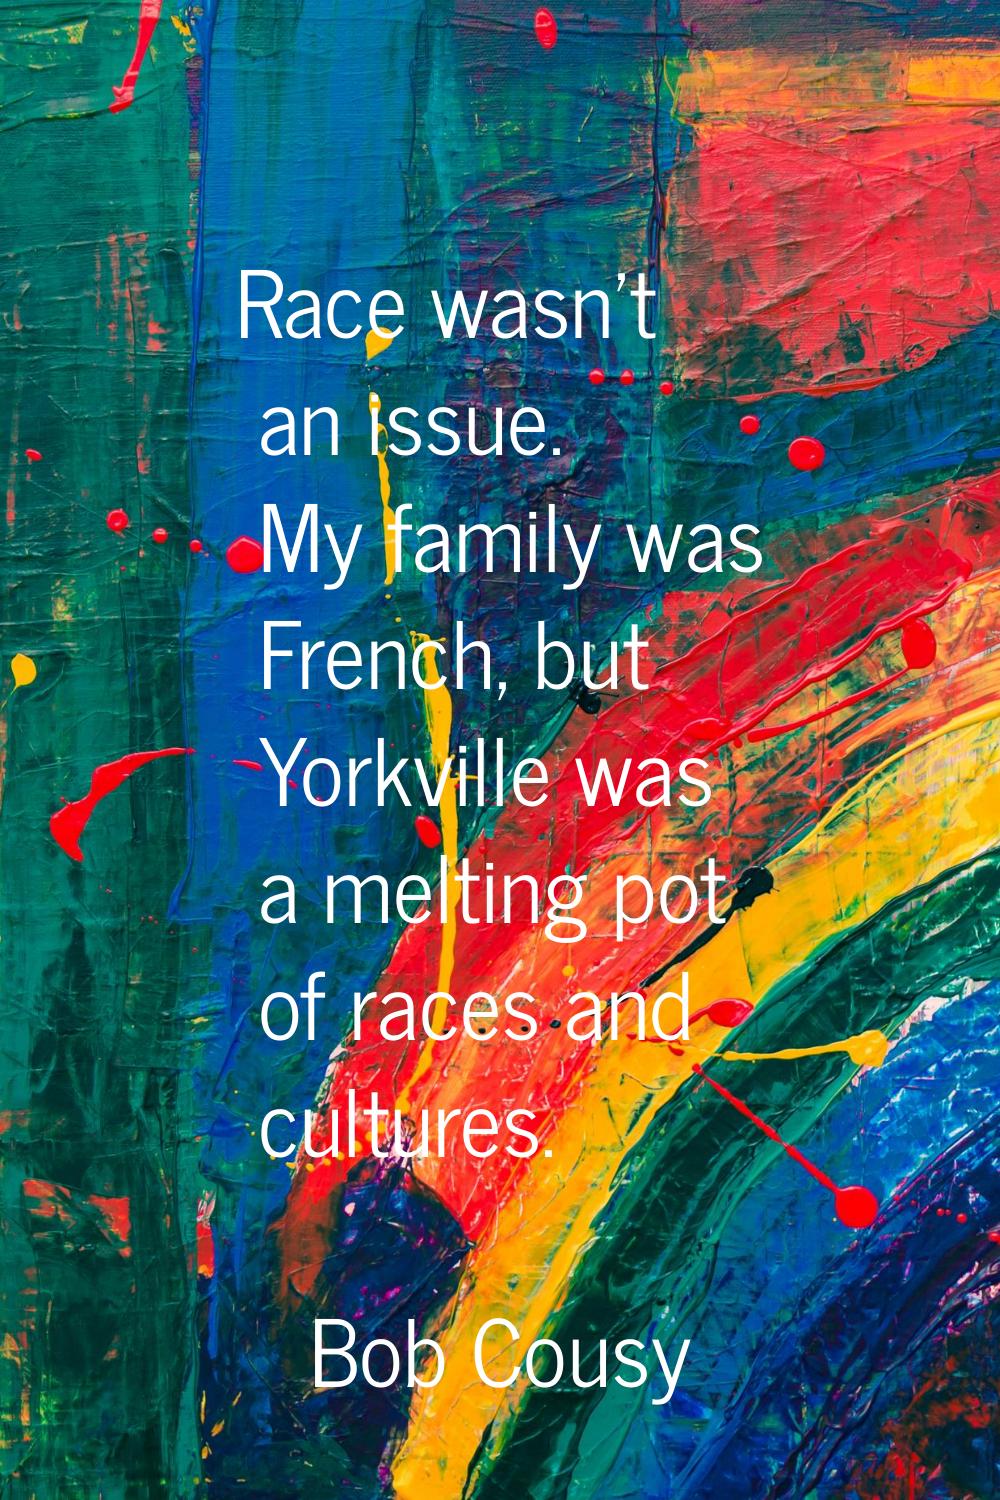 Race wasn't an issue. My family was French, but Yorkville was a melting pot of races and cultures.